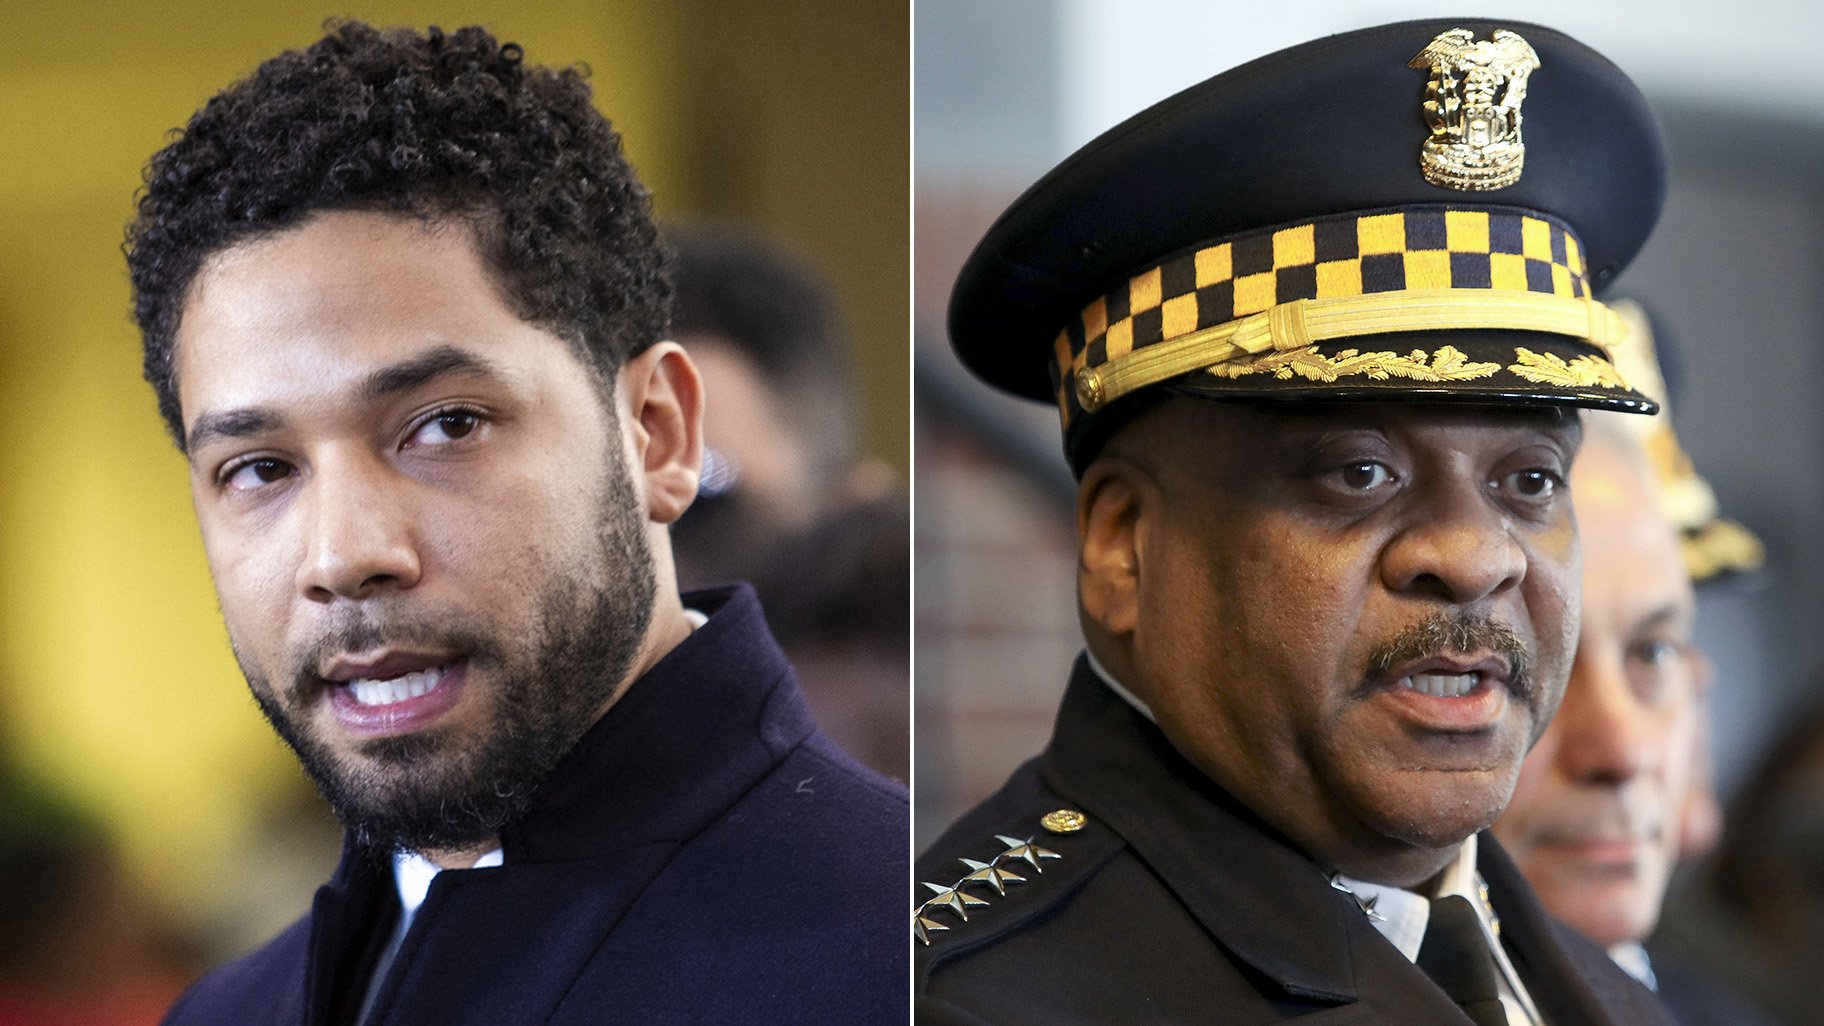 Jussie Smollett, left, and former Police Superintendent Eddie Johnson speak to the press, separately, on Tuesday, March 26, 2019, the day prosecutors dropped all charges against the “Empire” actor. (Credit: Ashlee Rezin / Chicago Sun-Times via AP; and Teresa Crawford / AP Photo)